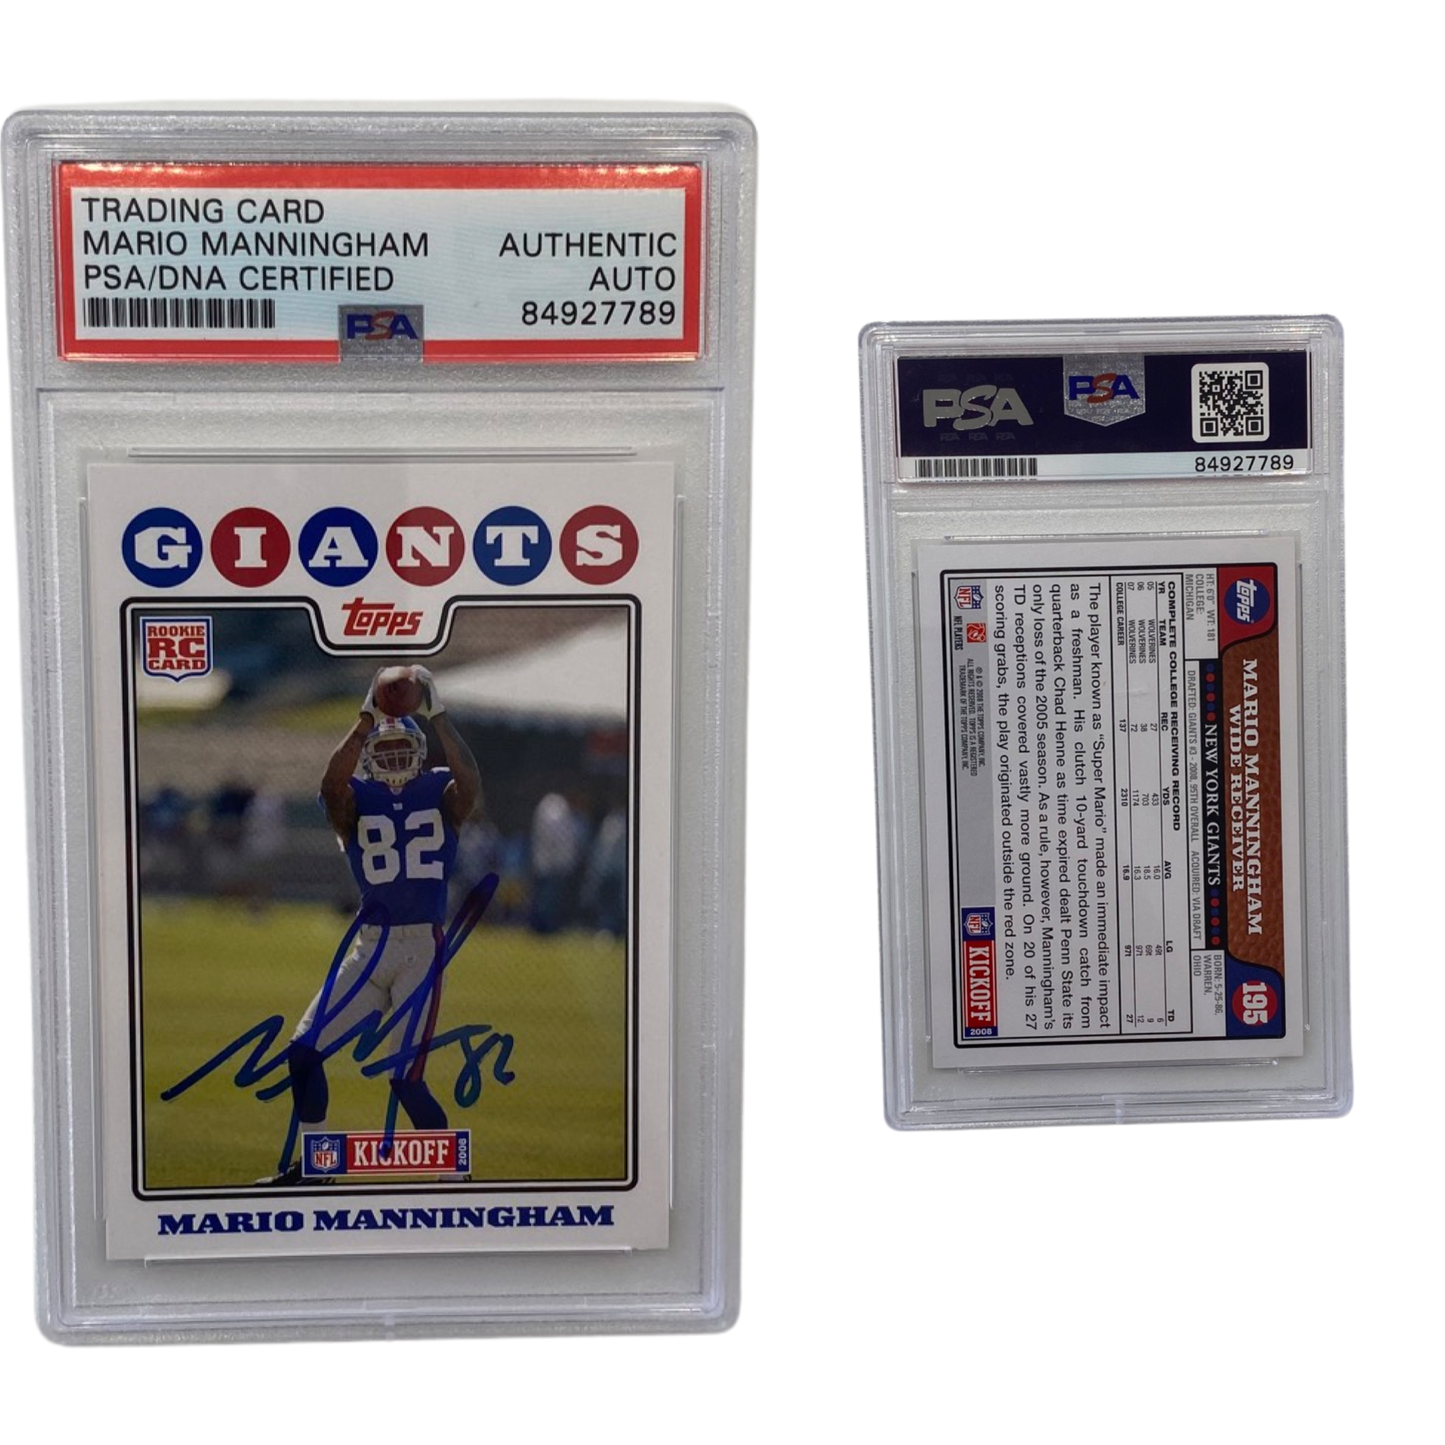 2008 Mario Manningham Topps Rookie Card NFL Kickoff #195 Autographed PSA Auto Authentic